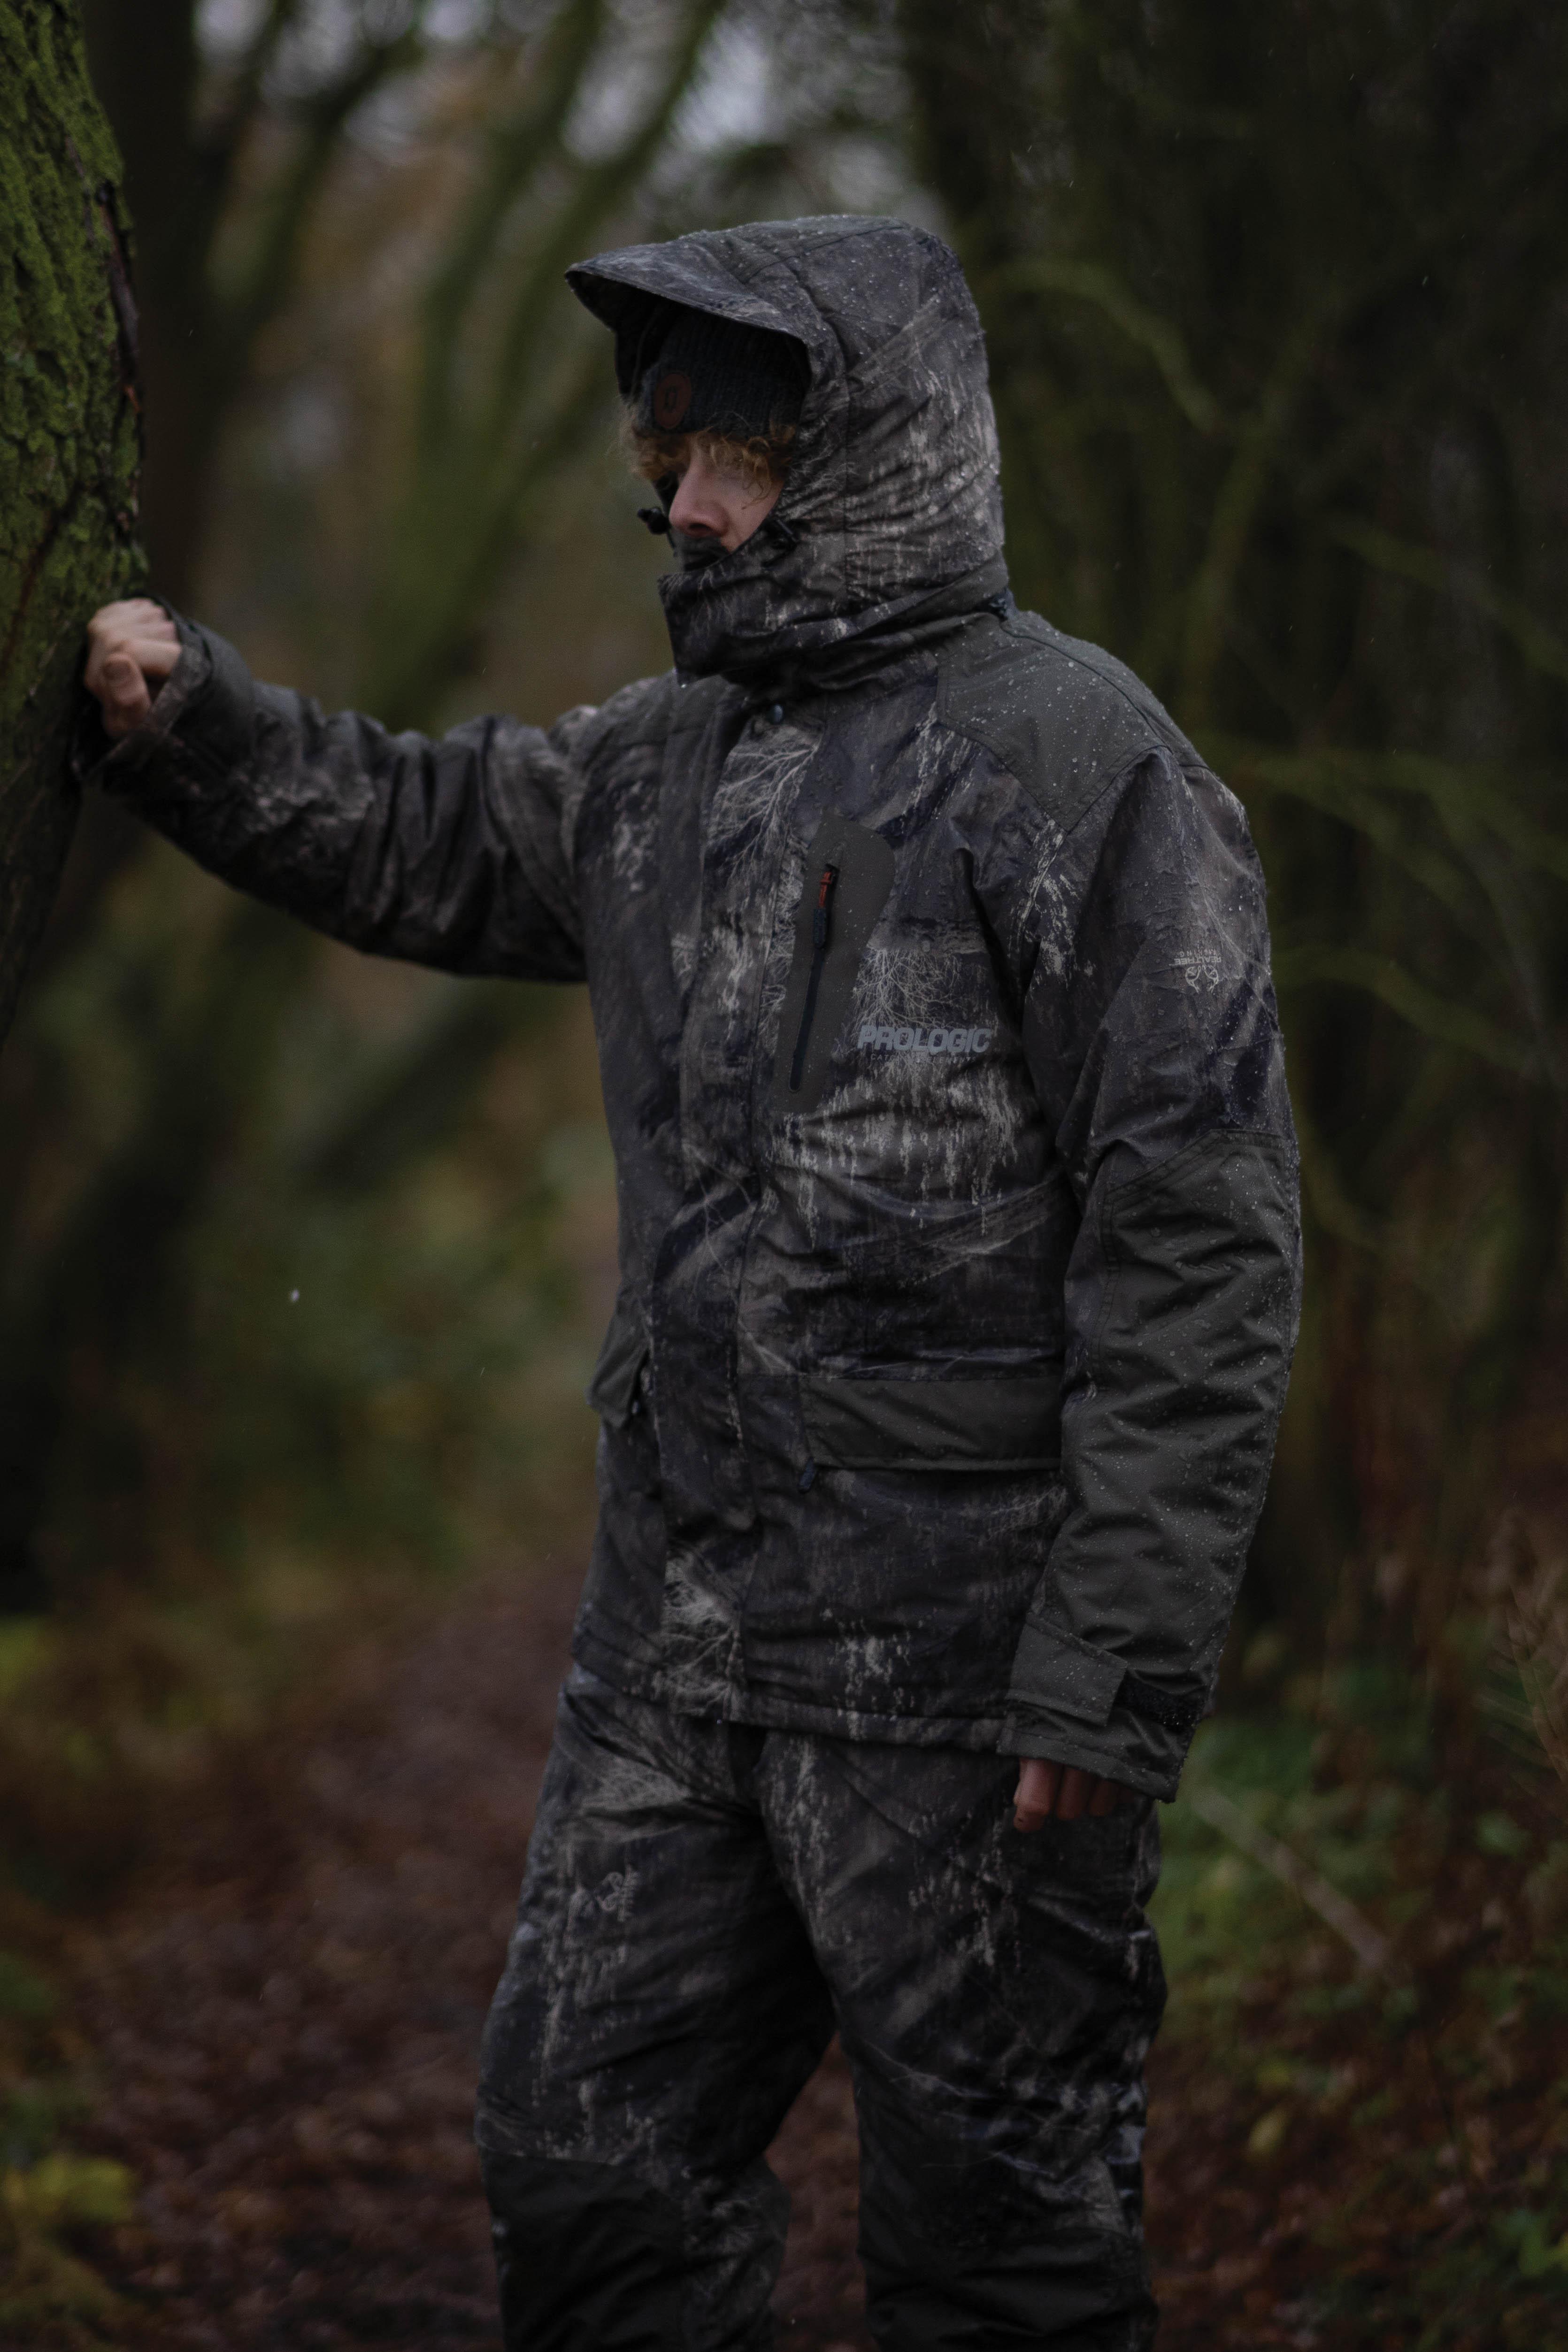 Prologic's new range of cold-weather clothing will keep you toastie